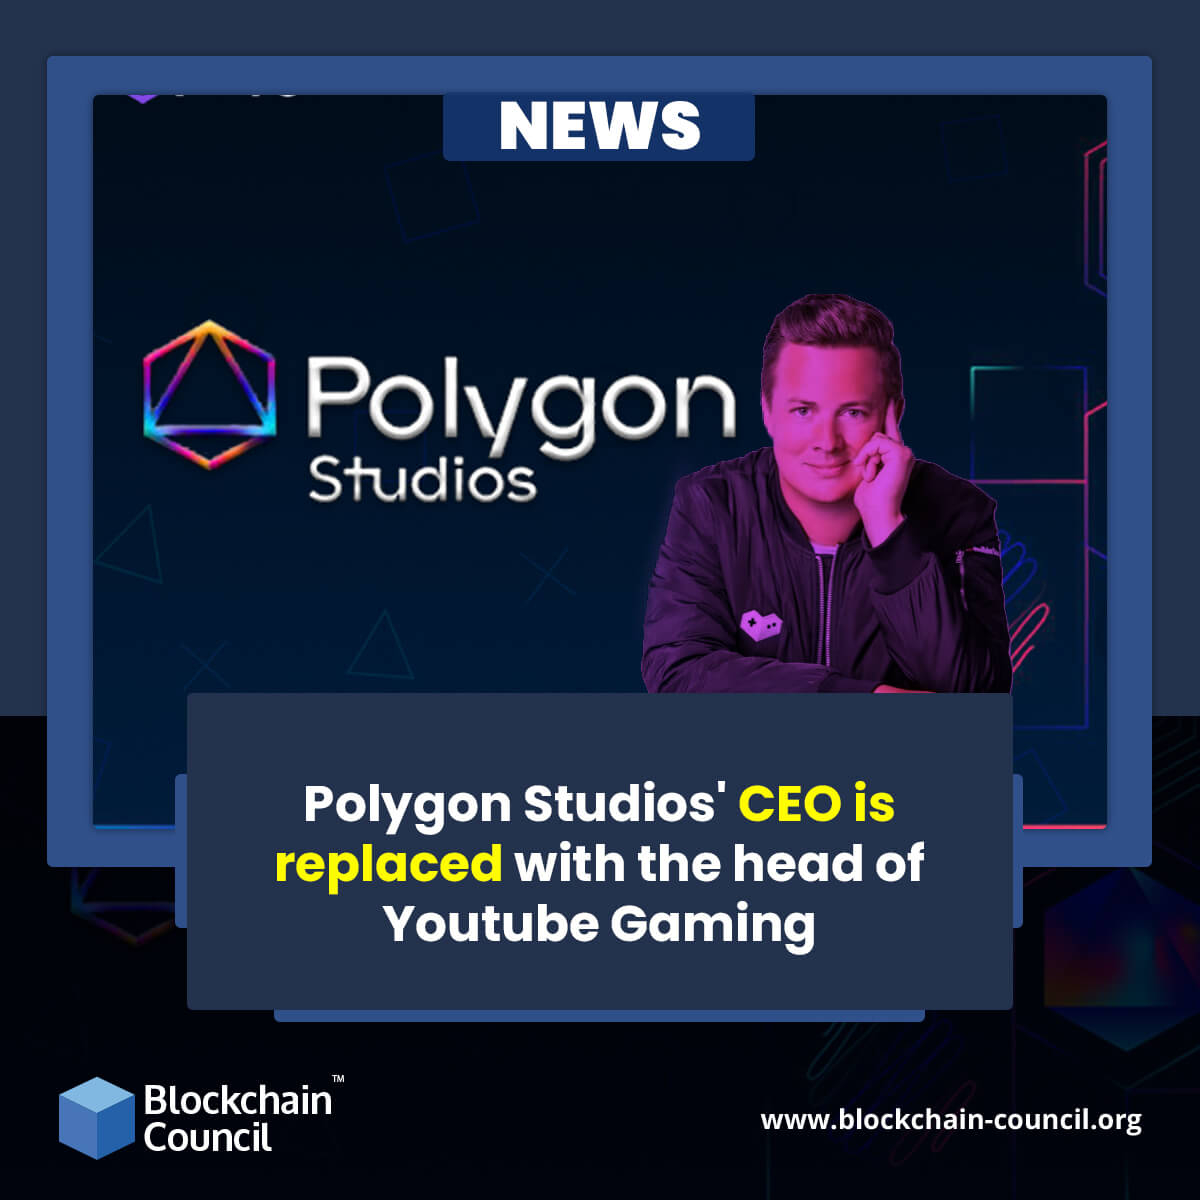 Polygon Studios' CEO is replaced with the head of Youtube Gaming